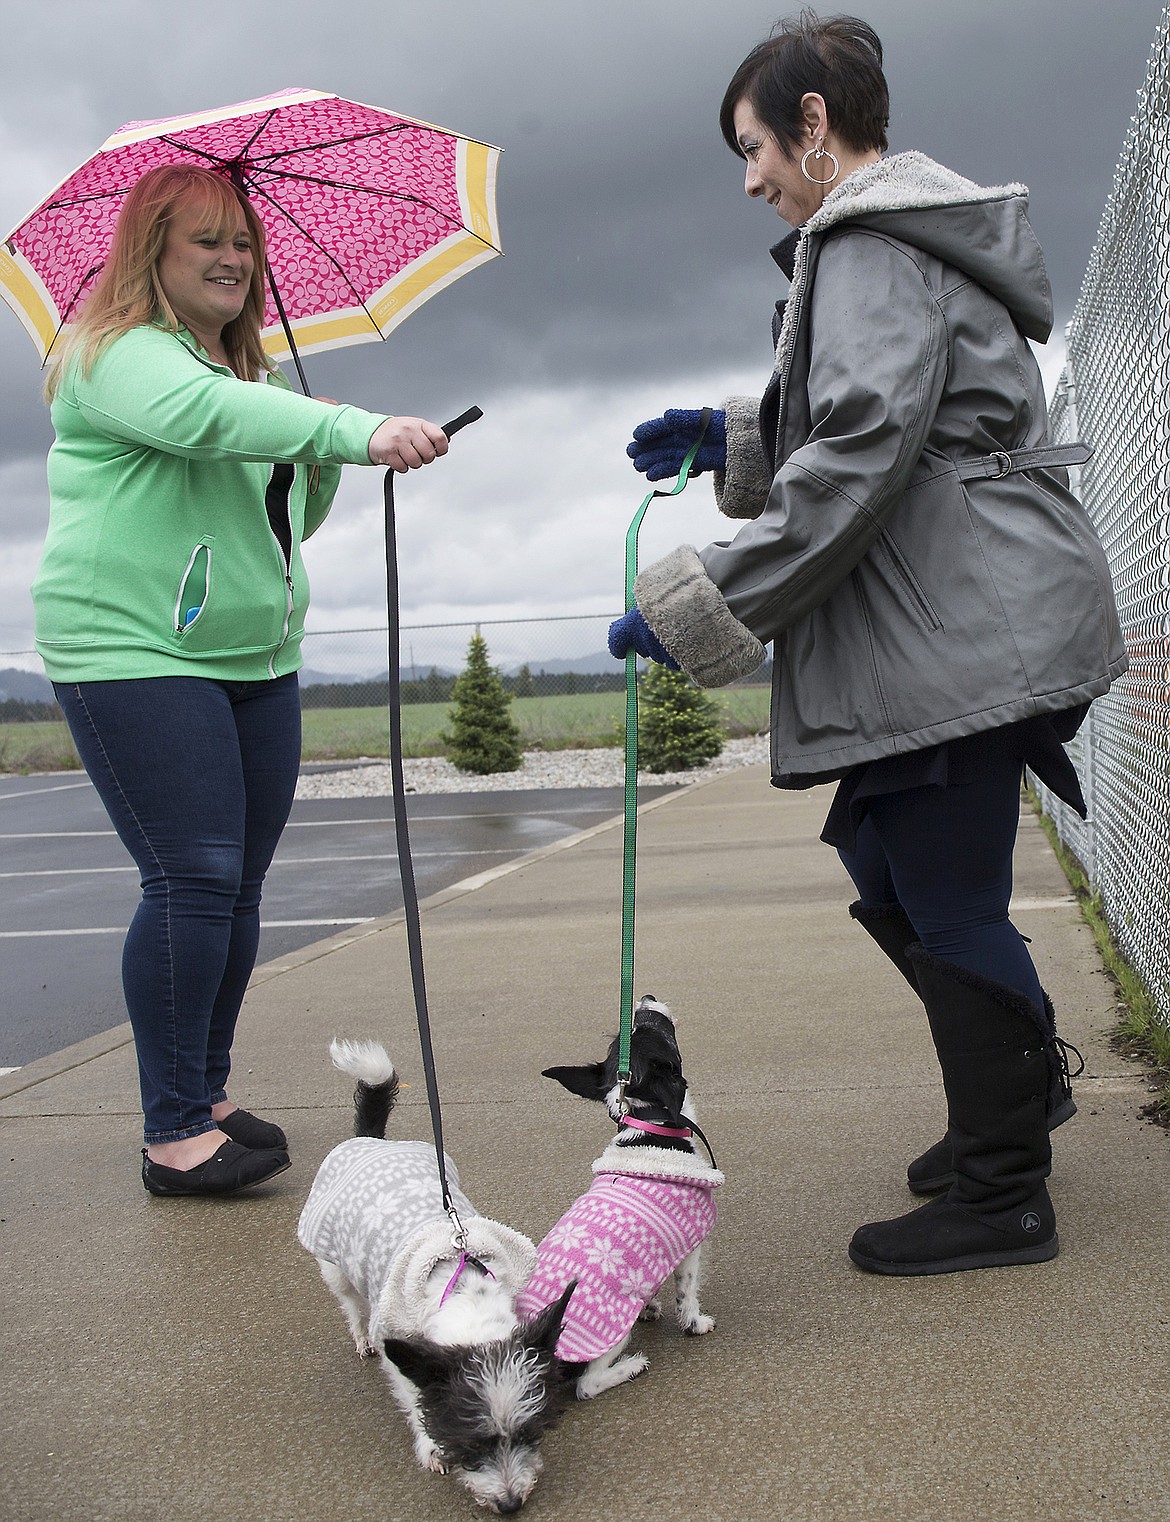 LISA JAMES/Press
Jen Arrotta, left, helps Suzie Cano wrangle her terriers Felix, left, and Sasha, during the grand opening of Hayden&#146;s first dog park, Pawfoot Park, on Lancaster Road Friday. The smaller dogs soon got chilly as the wet weather turned cold, and headed for the shelter of the car, while bigger dogs played.